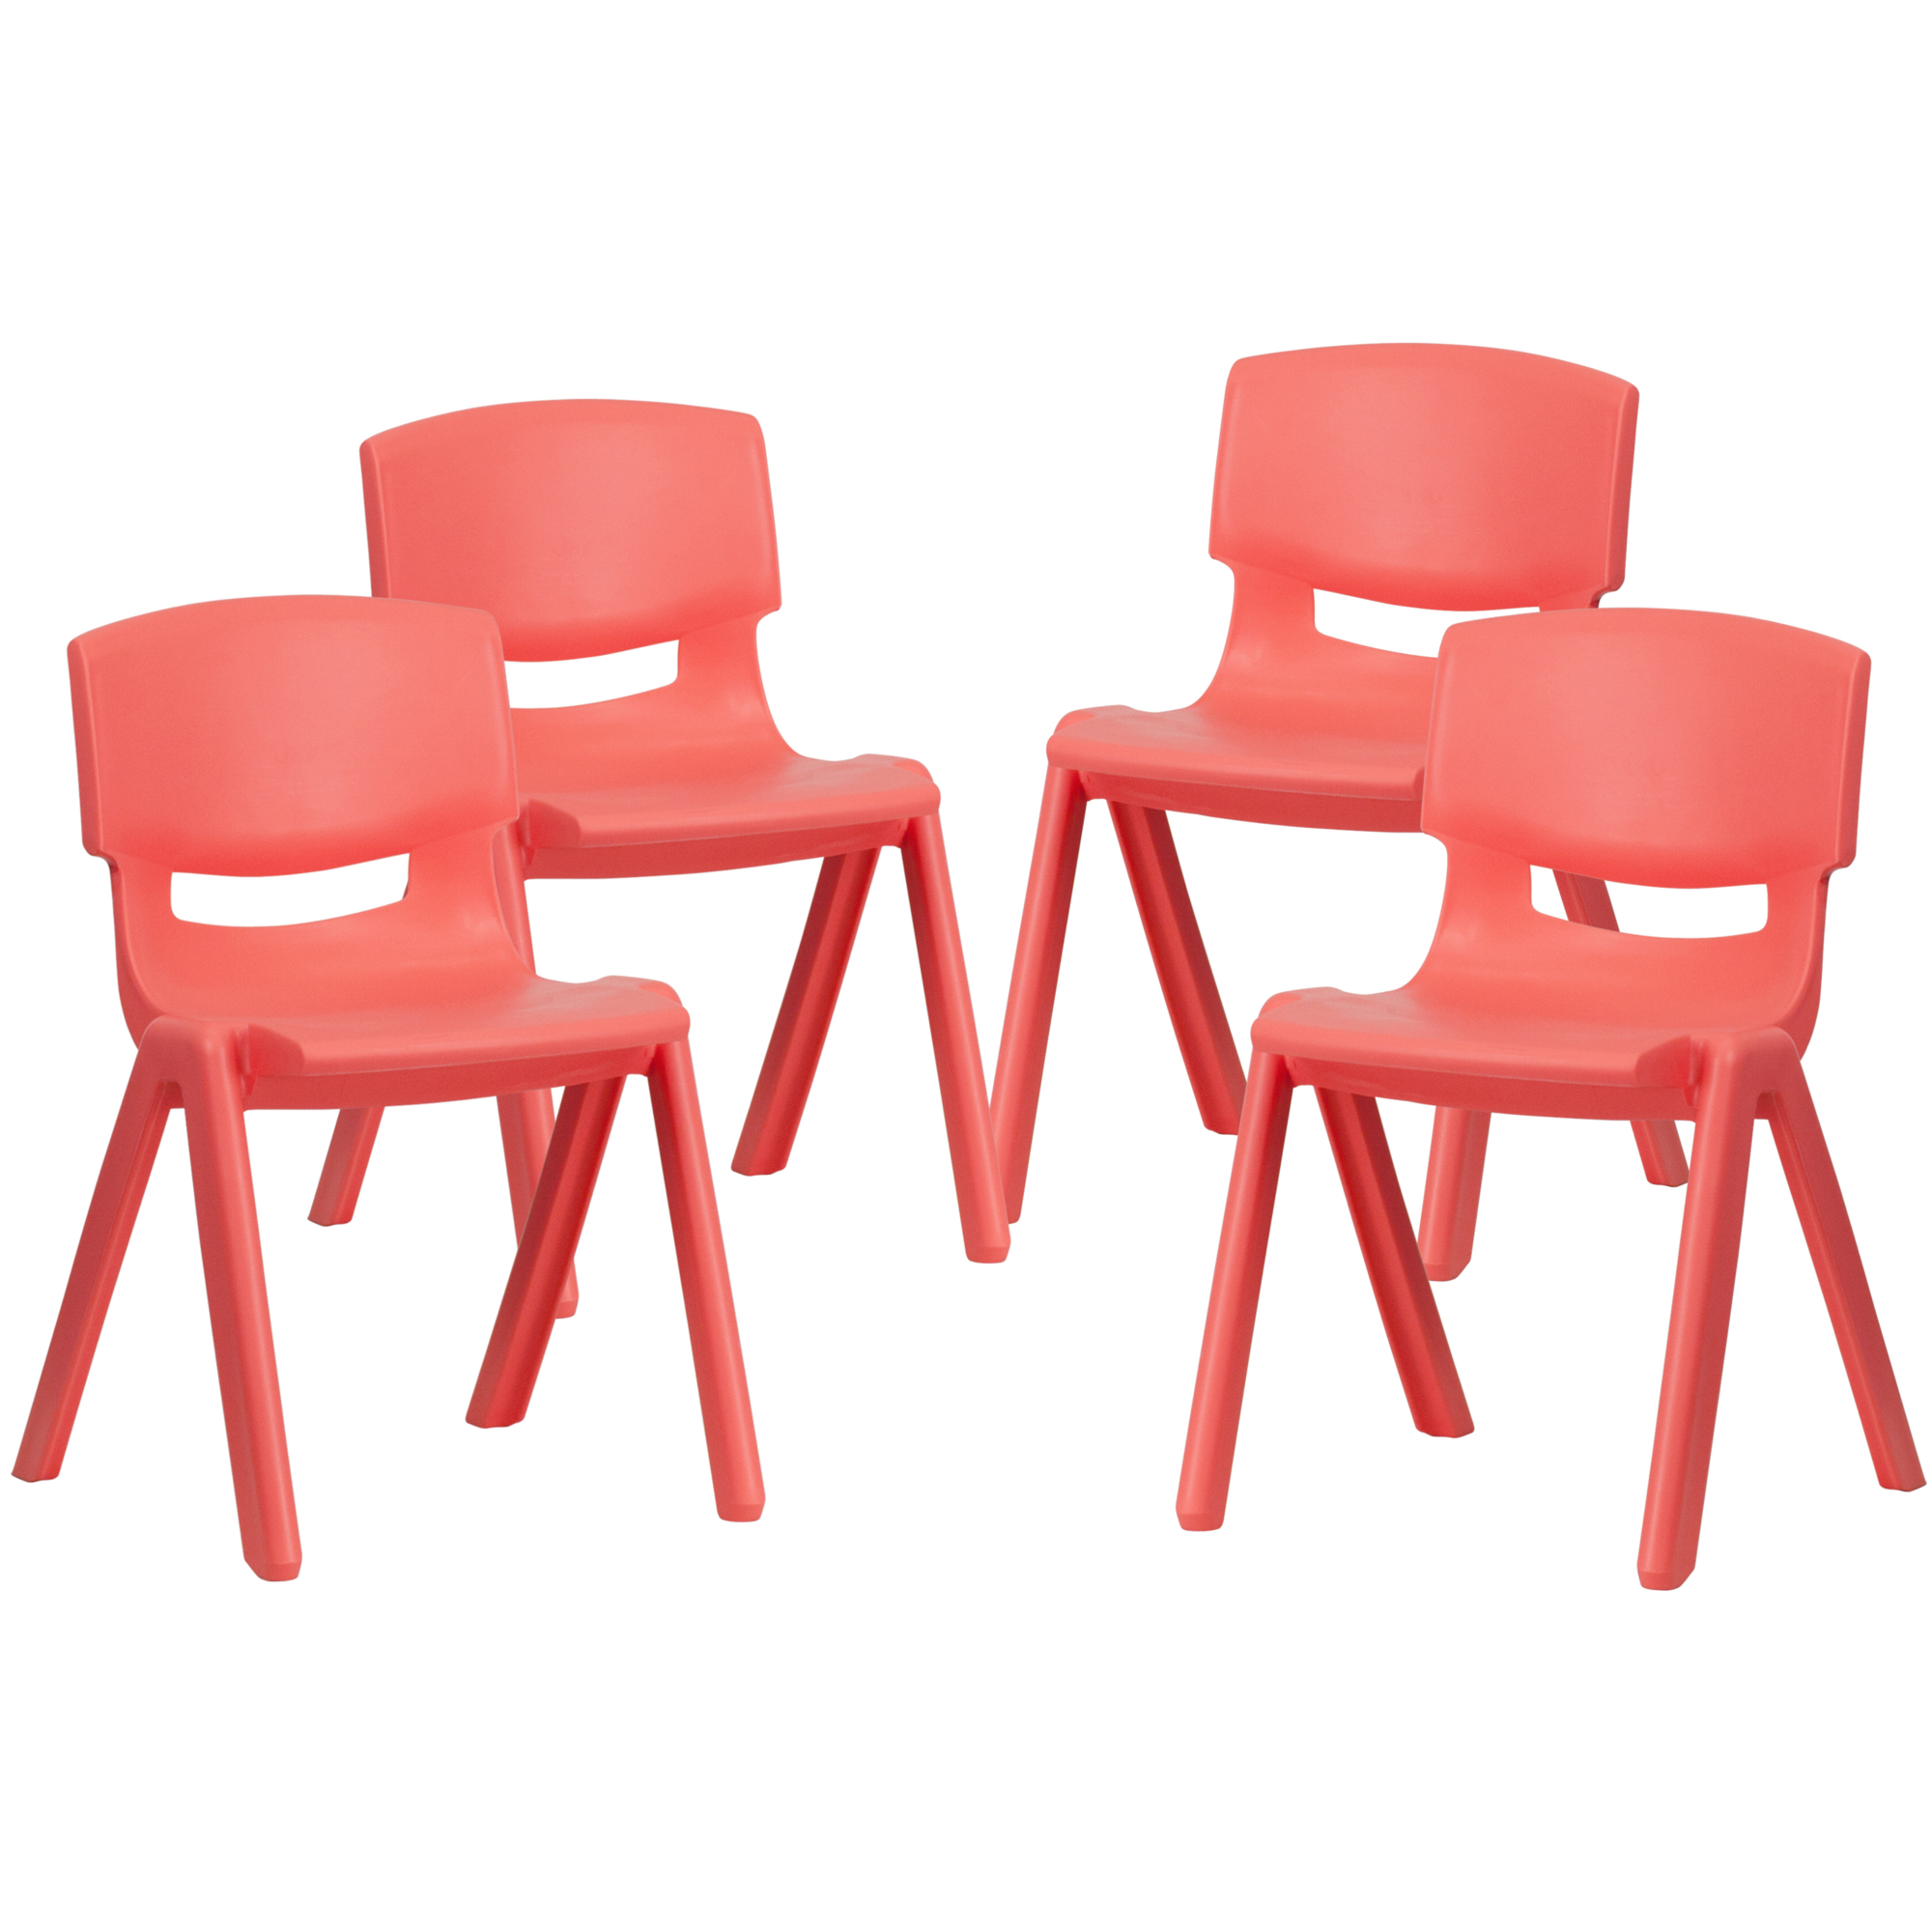 Flash Furniture, 4 Pack Red Plastic Stack School Chair-13.25Inch H Seat, Primary Color Red, Included (qty.) 4, Model 4YUYCX4004RED